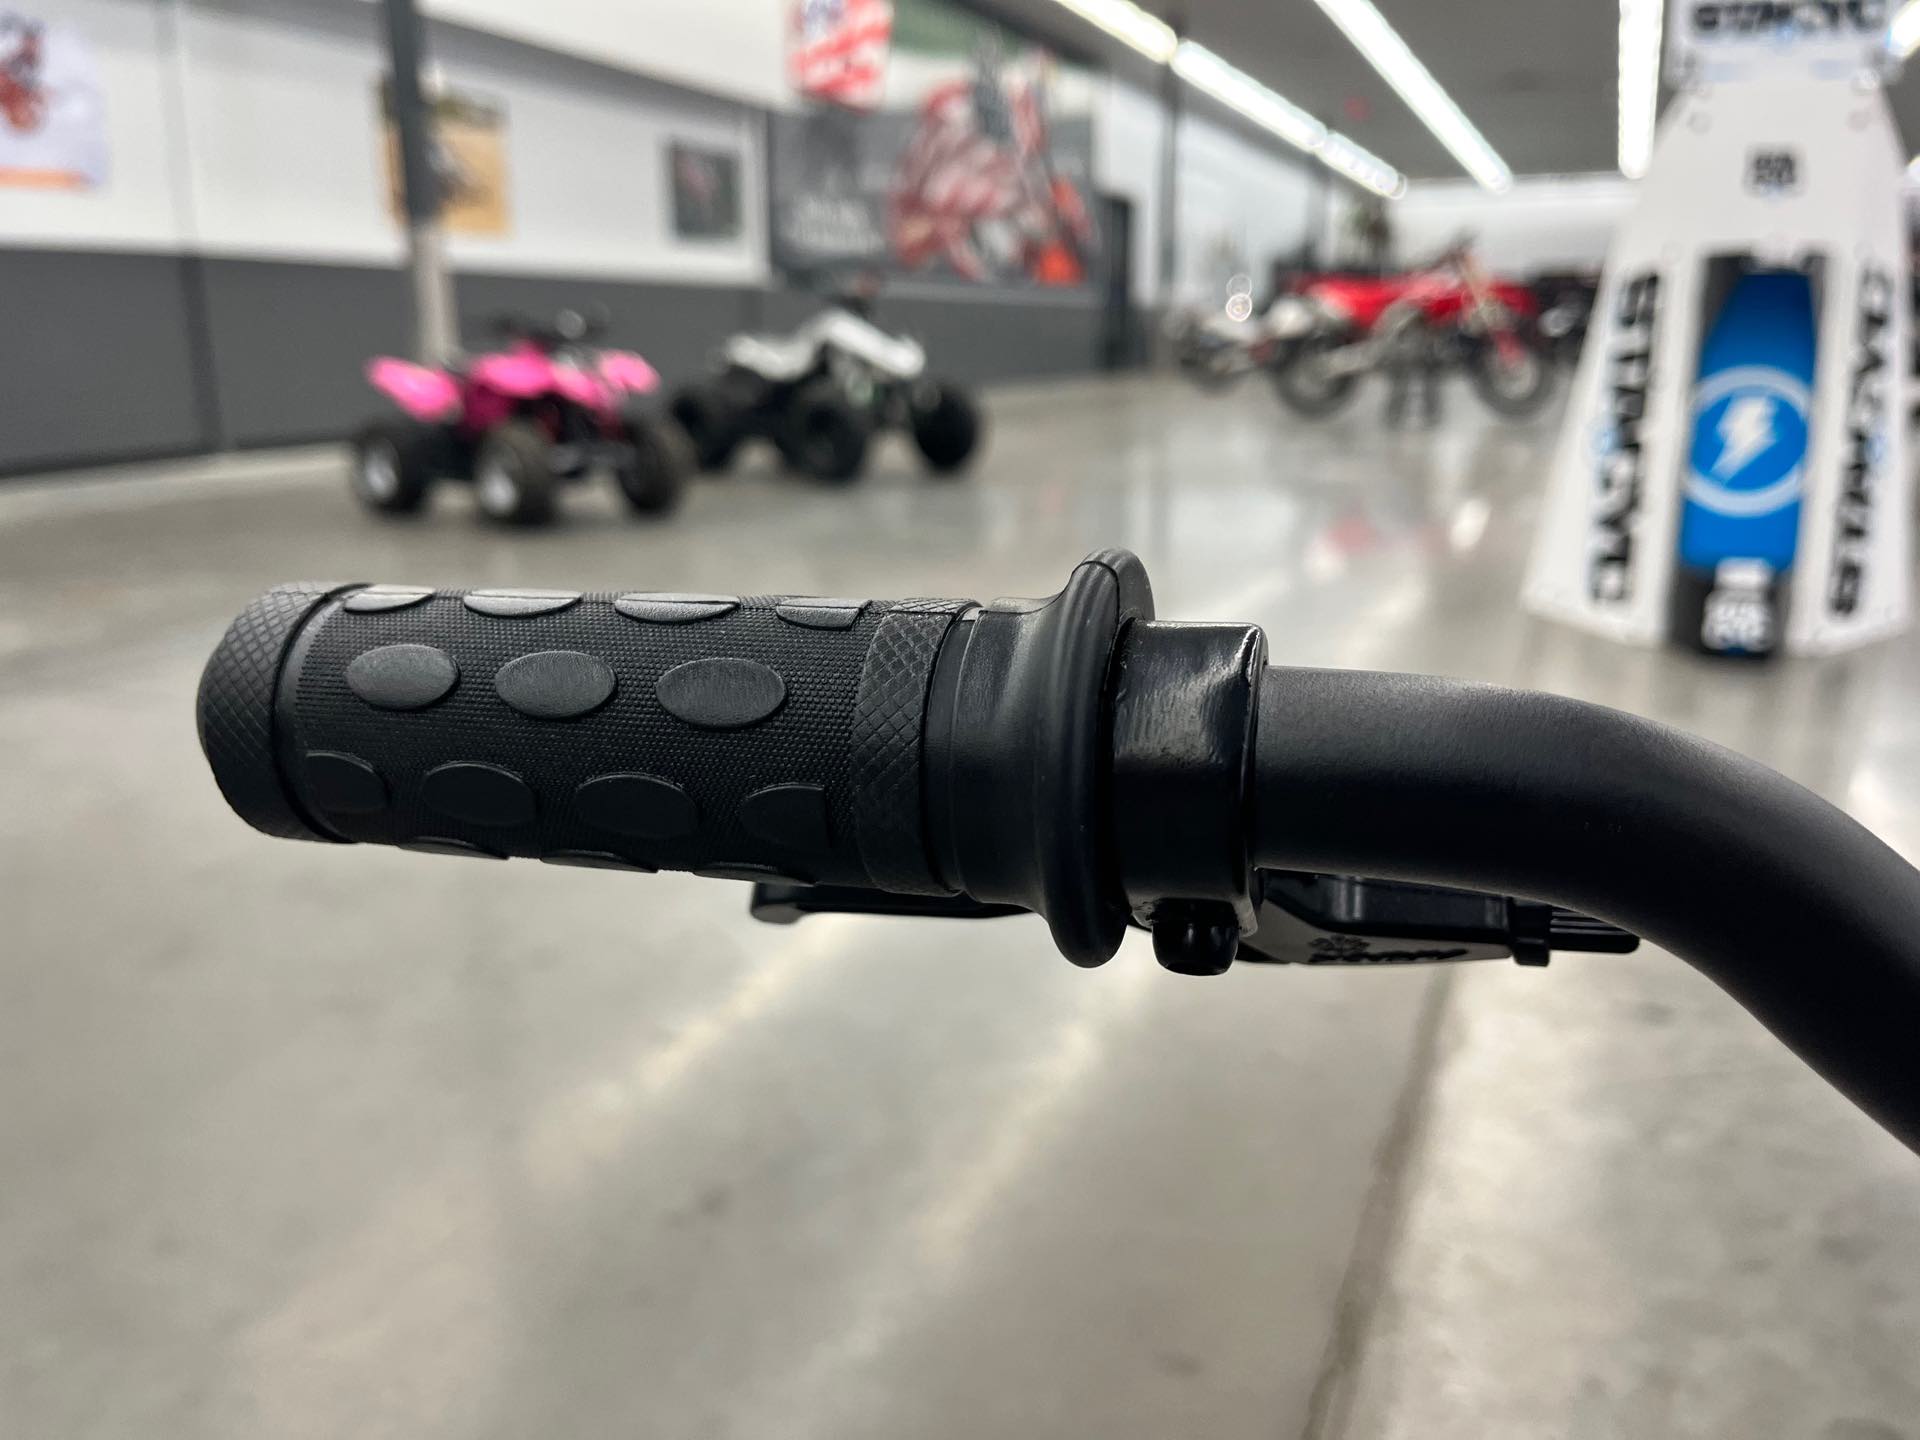 2021 Stacyc Brushless 16eDRIVE at Aces Motorcycles - Denver